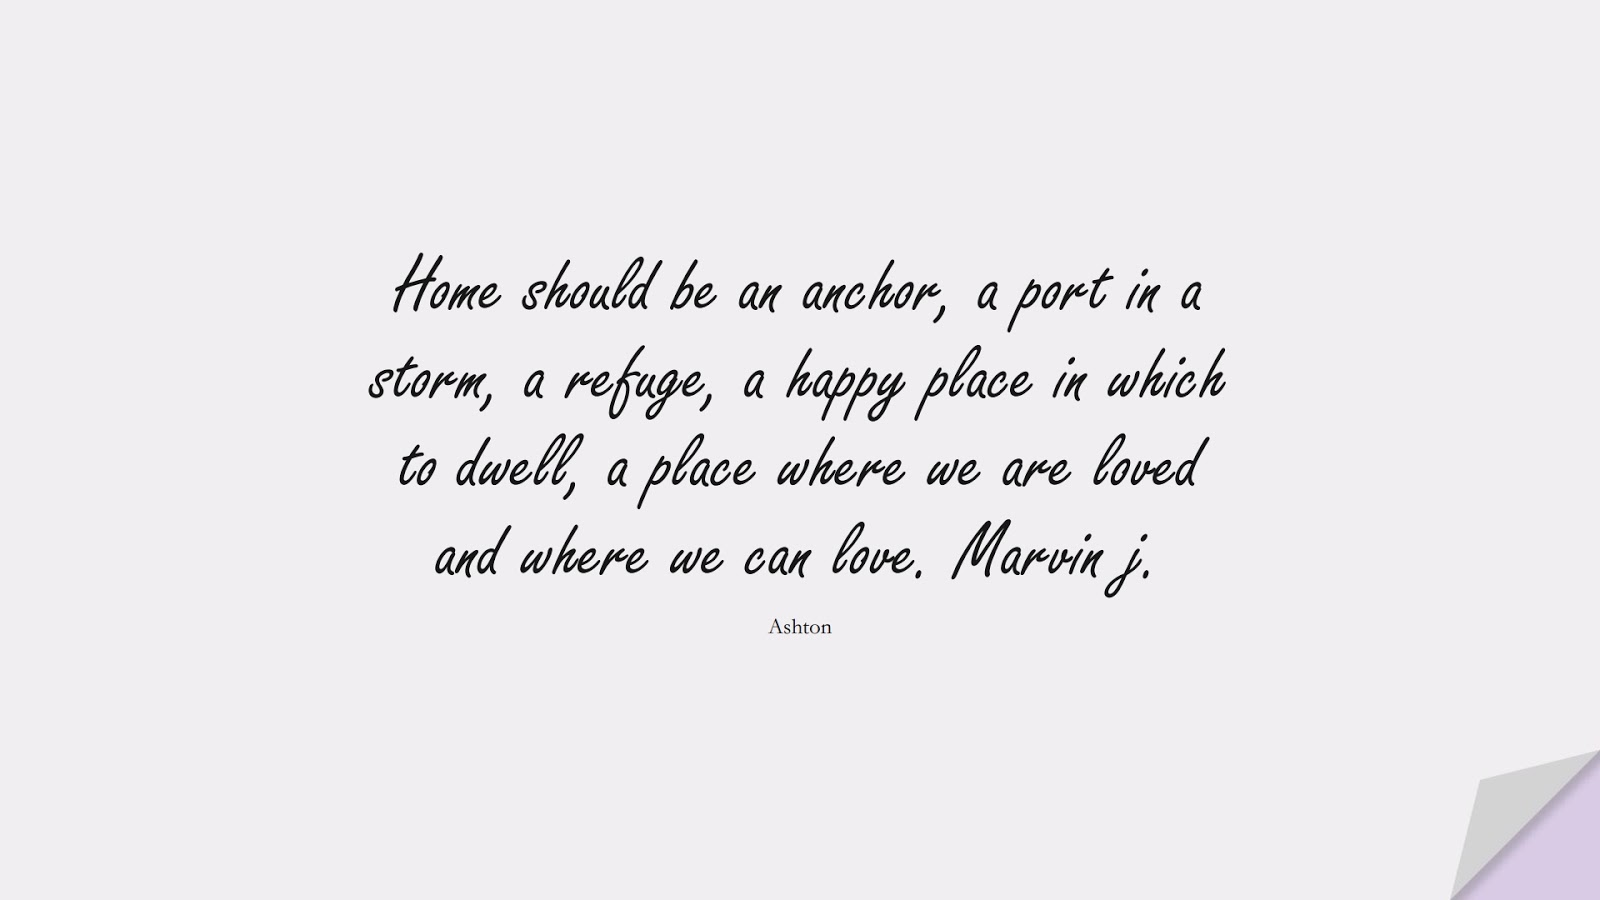 Home should be an anchor, a port in a storm, a refuge, a happy place in which to dwell, a place where we are loved and where we can love. Marvin j. (Ashton);  #FamilyQuotes